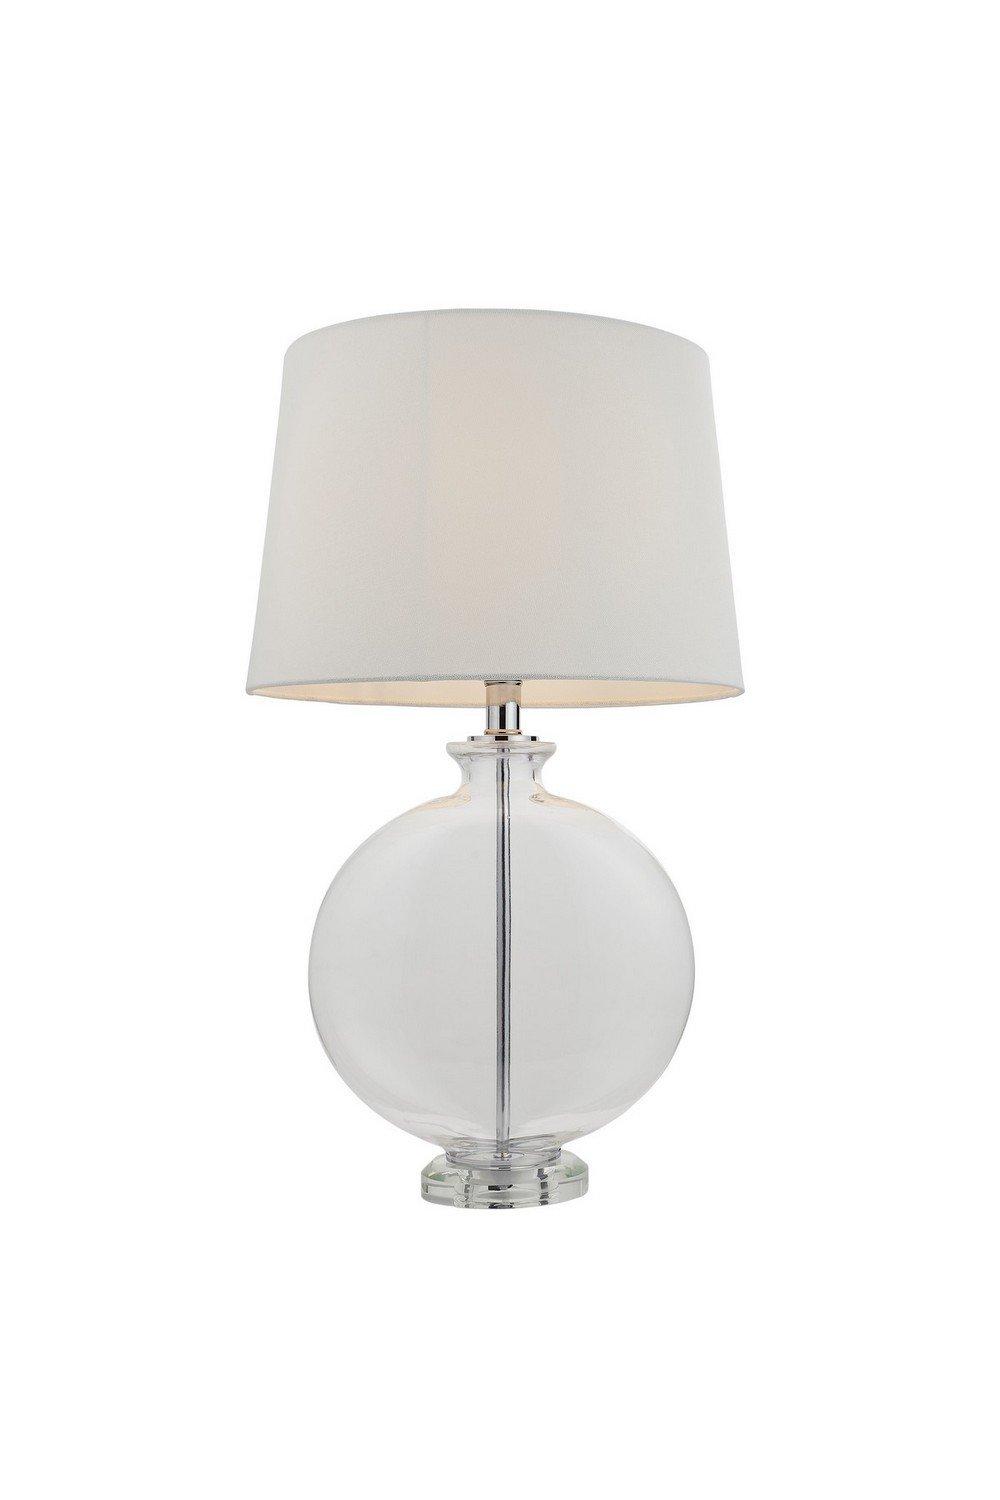 Gideon Table Lamp Clear Glass Nickel Plate Shade